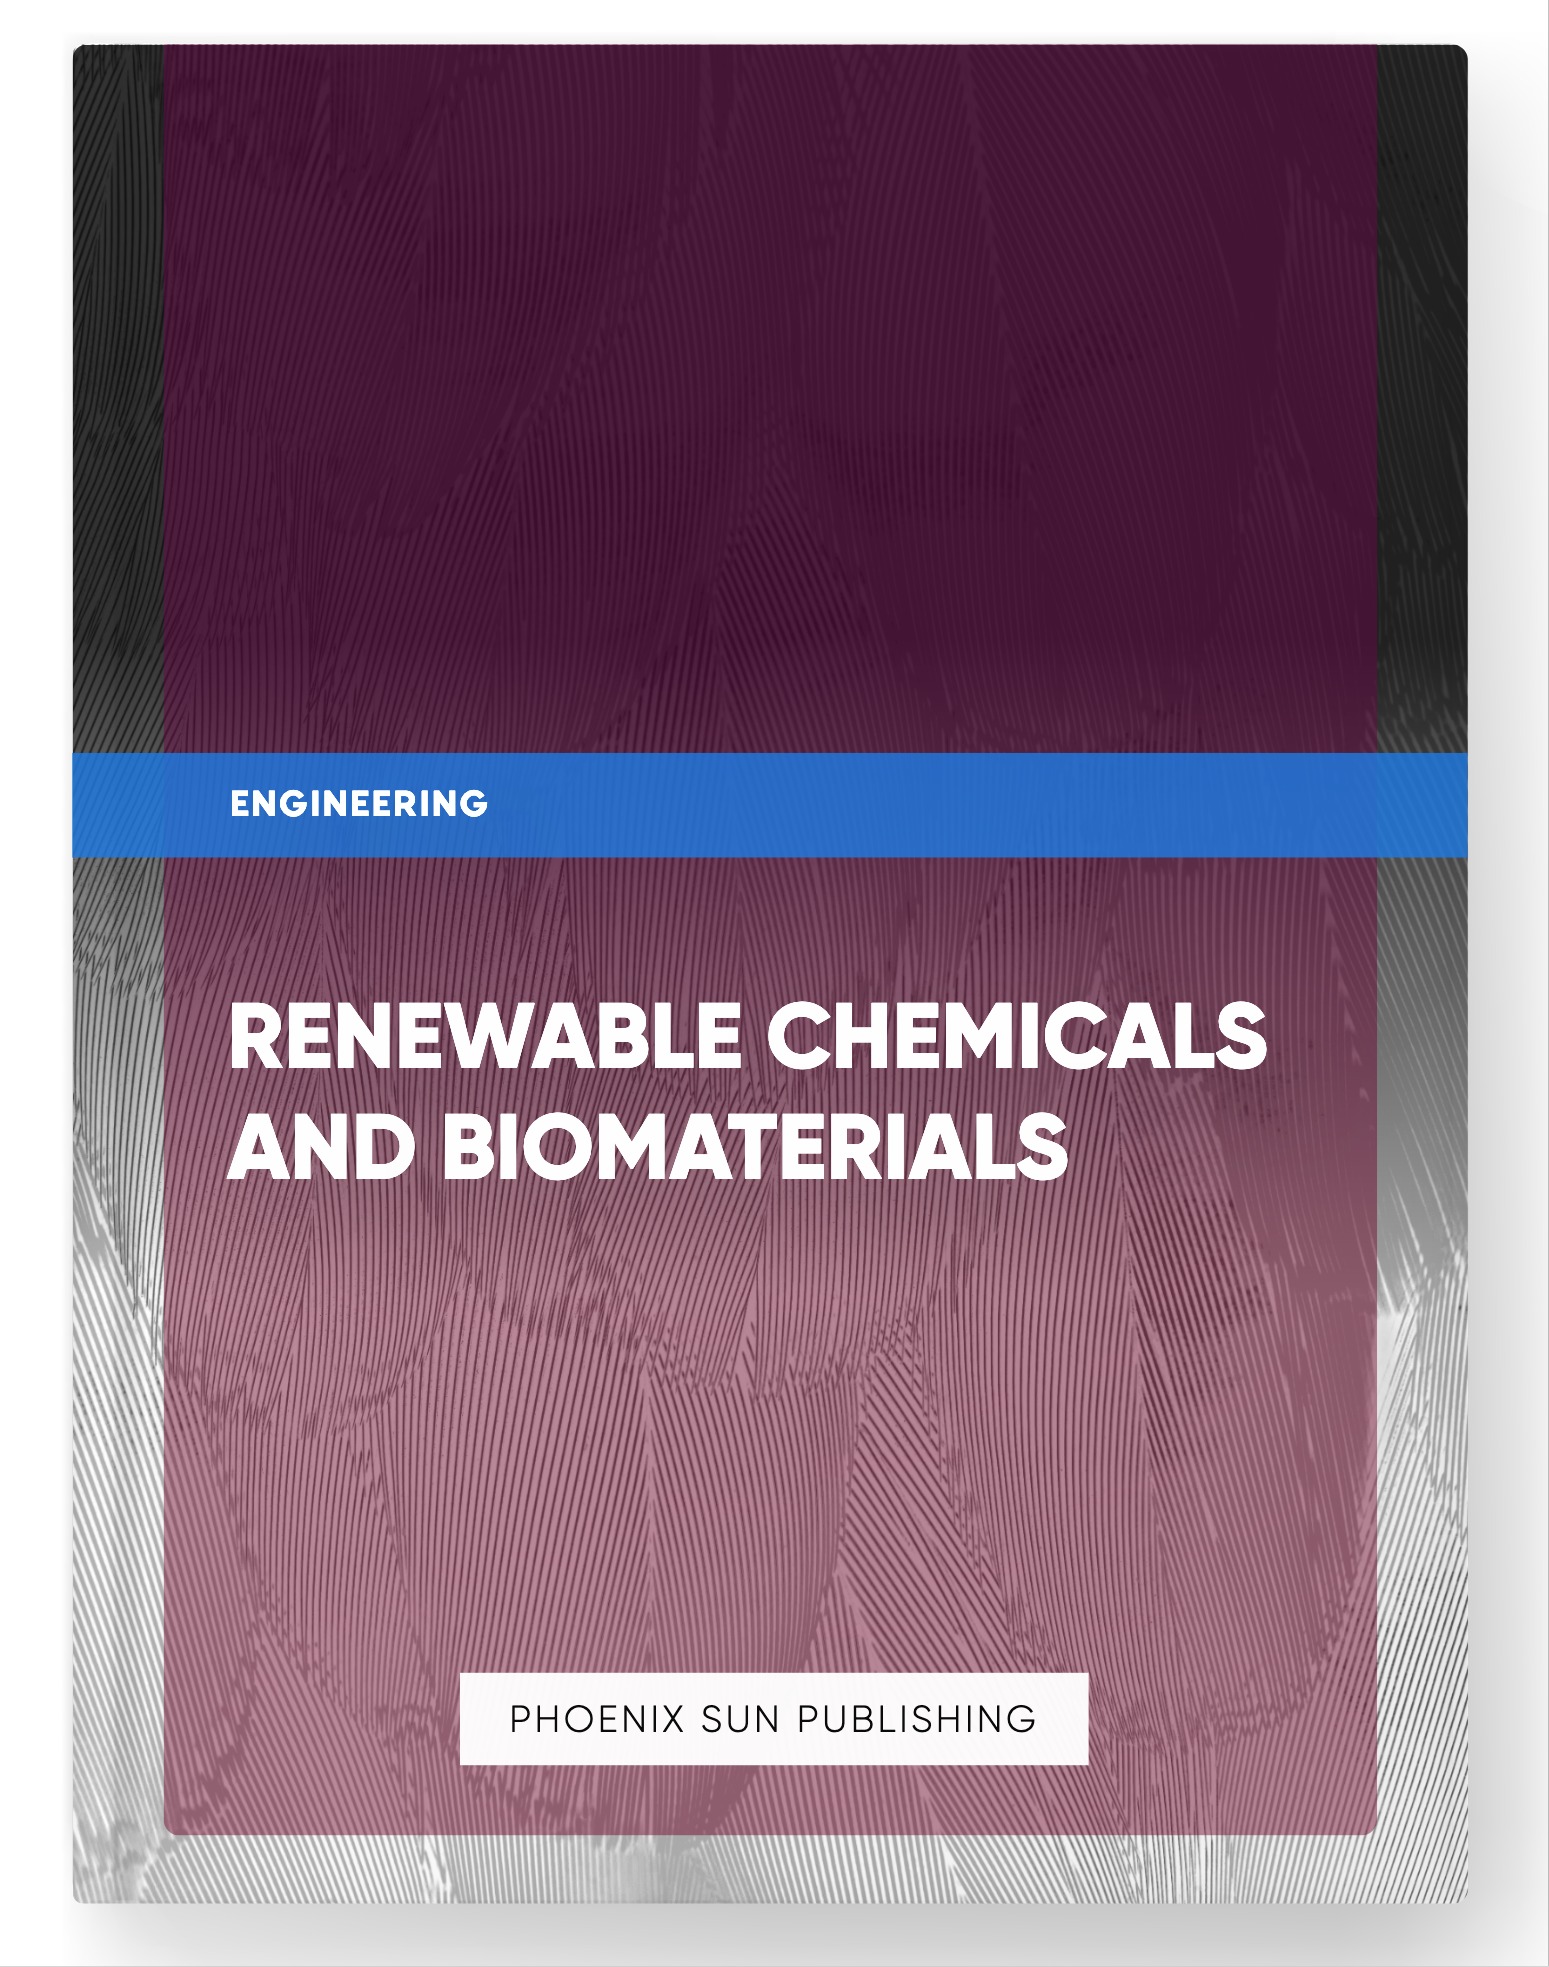 Renewable Chemicals and Biomaterials